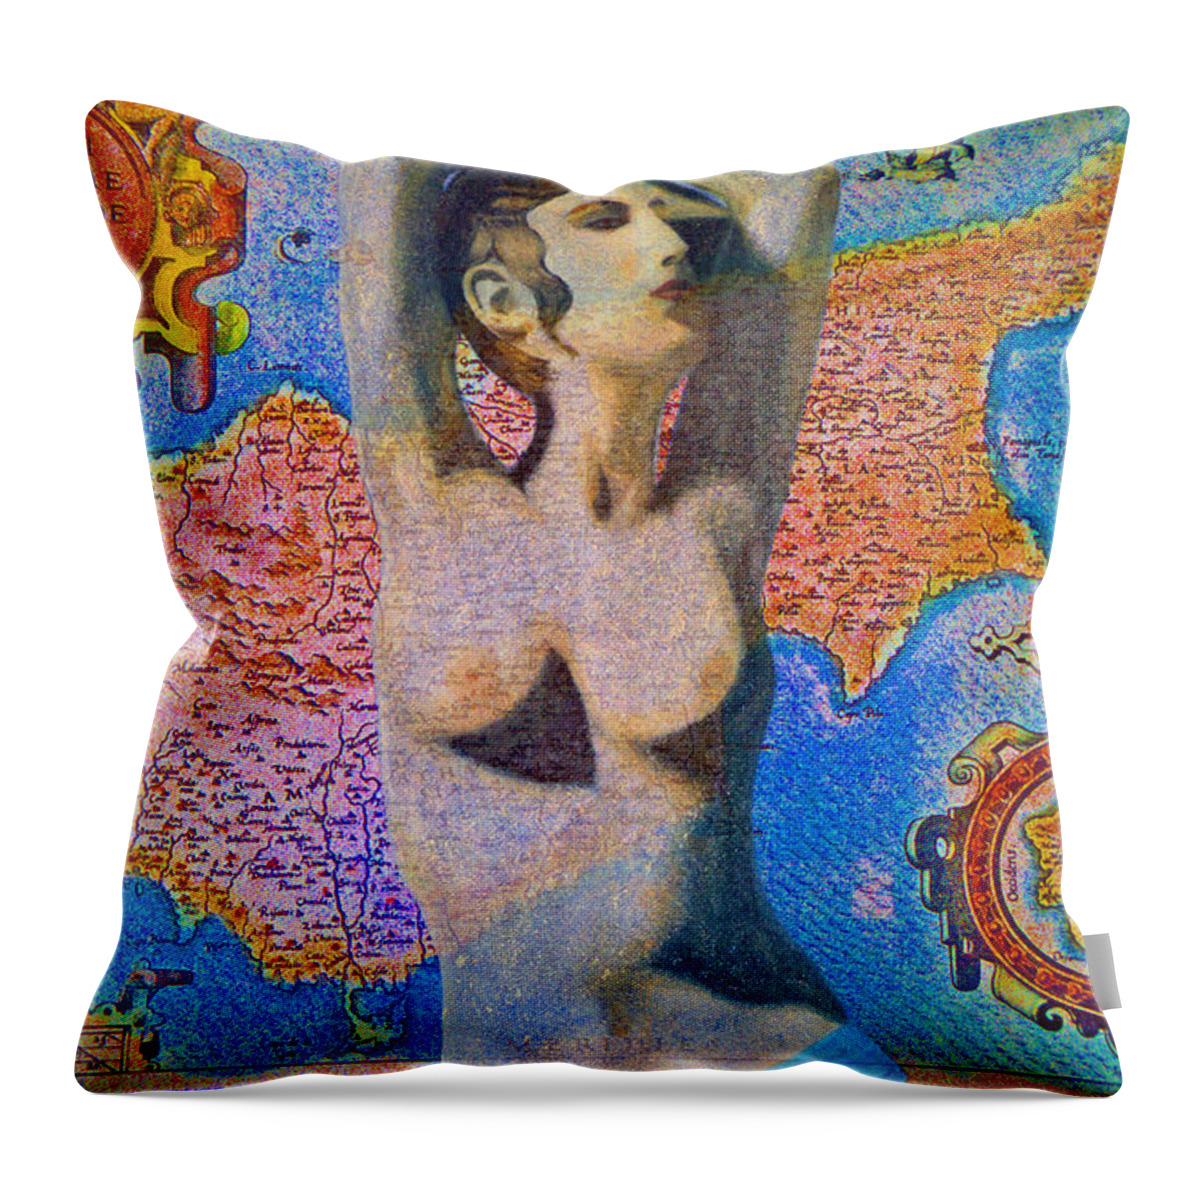 Augusta Stylianou Throw Pillow featuring the digital art Aphrodite and Ancient Cyprus Map by Augusta Stylianou